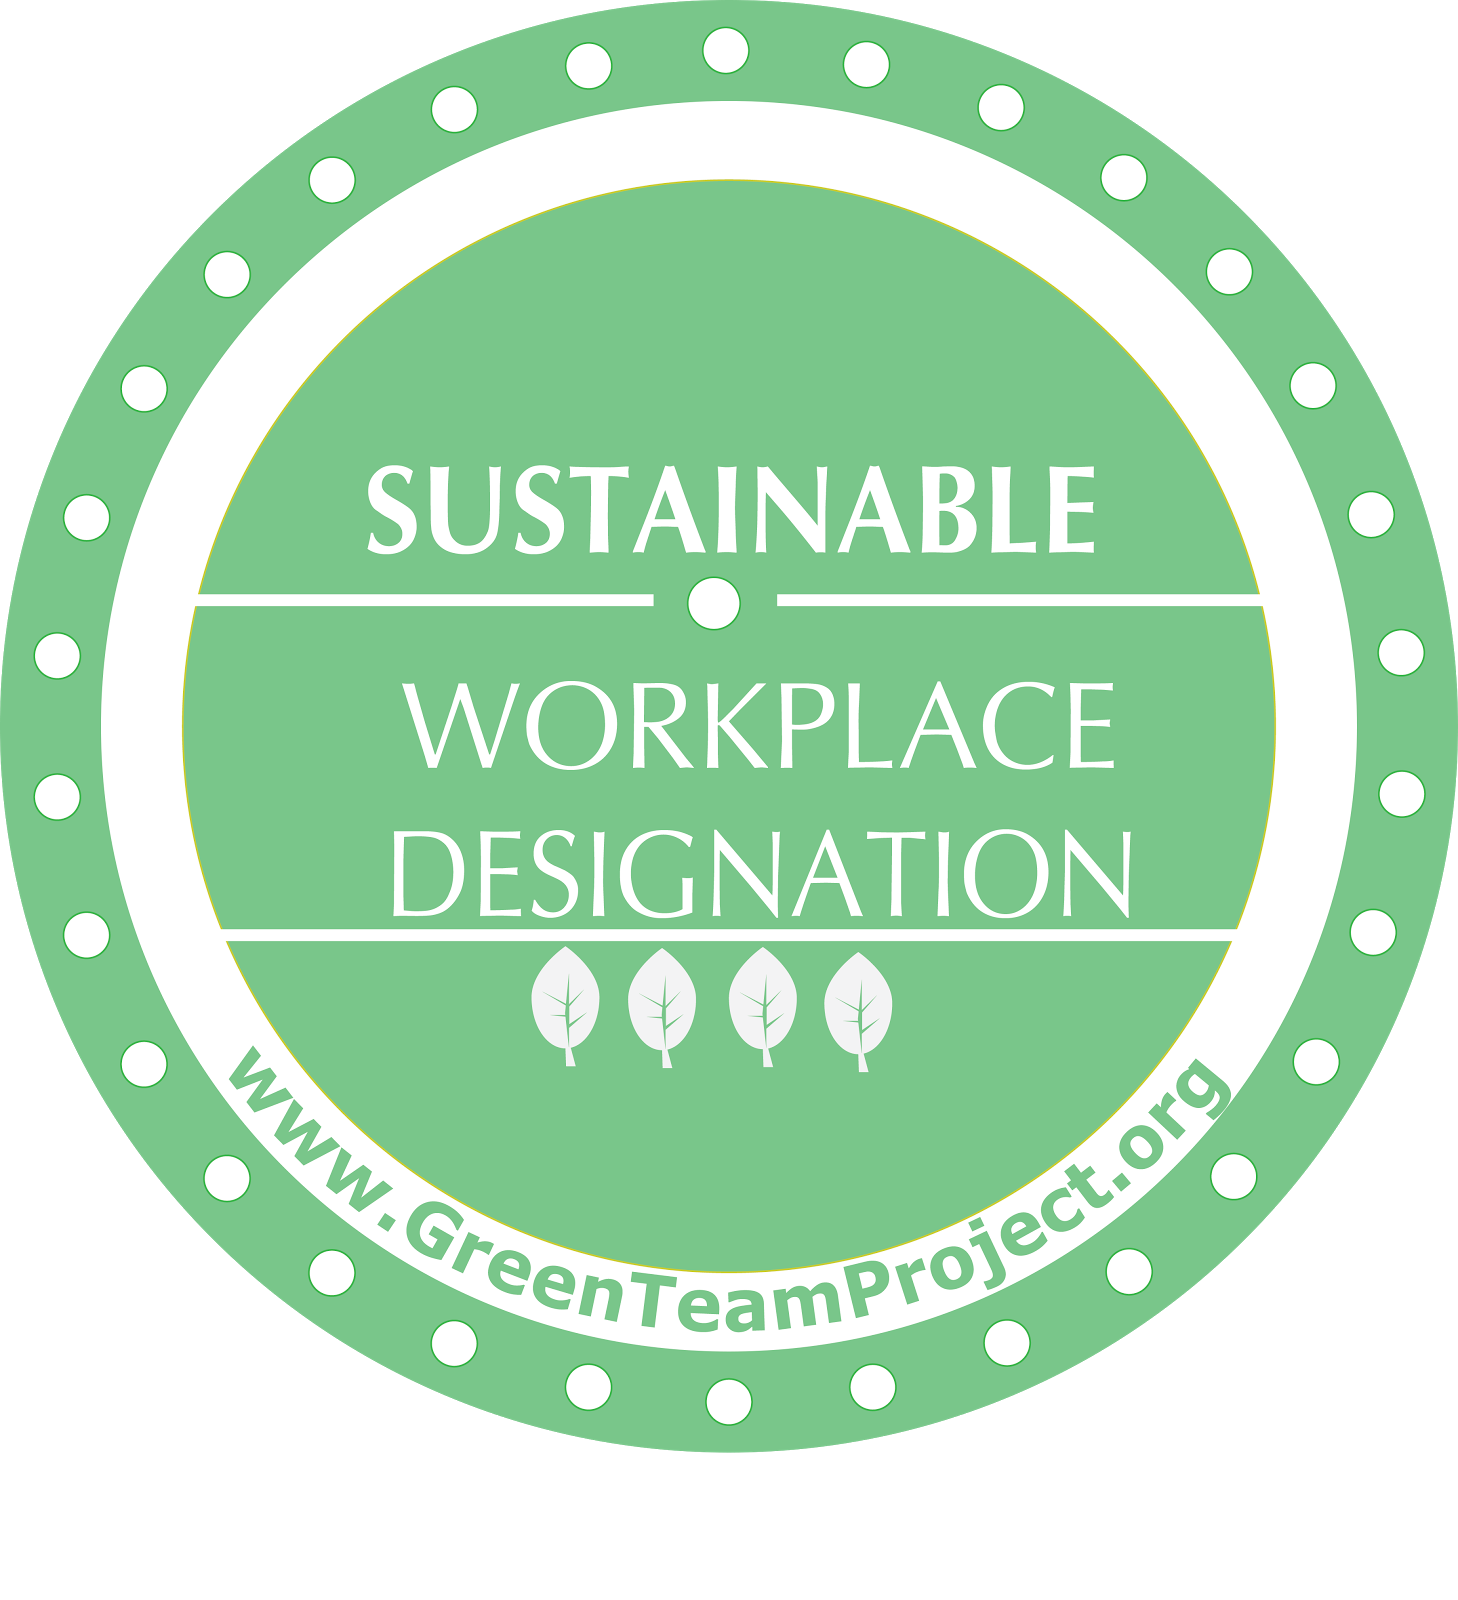 Sustainable Workplace Designation Seal